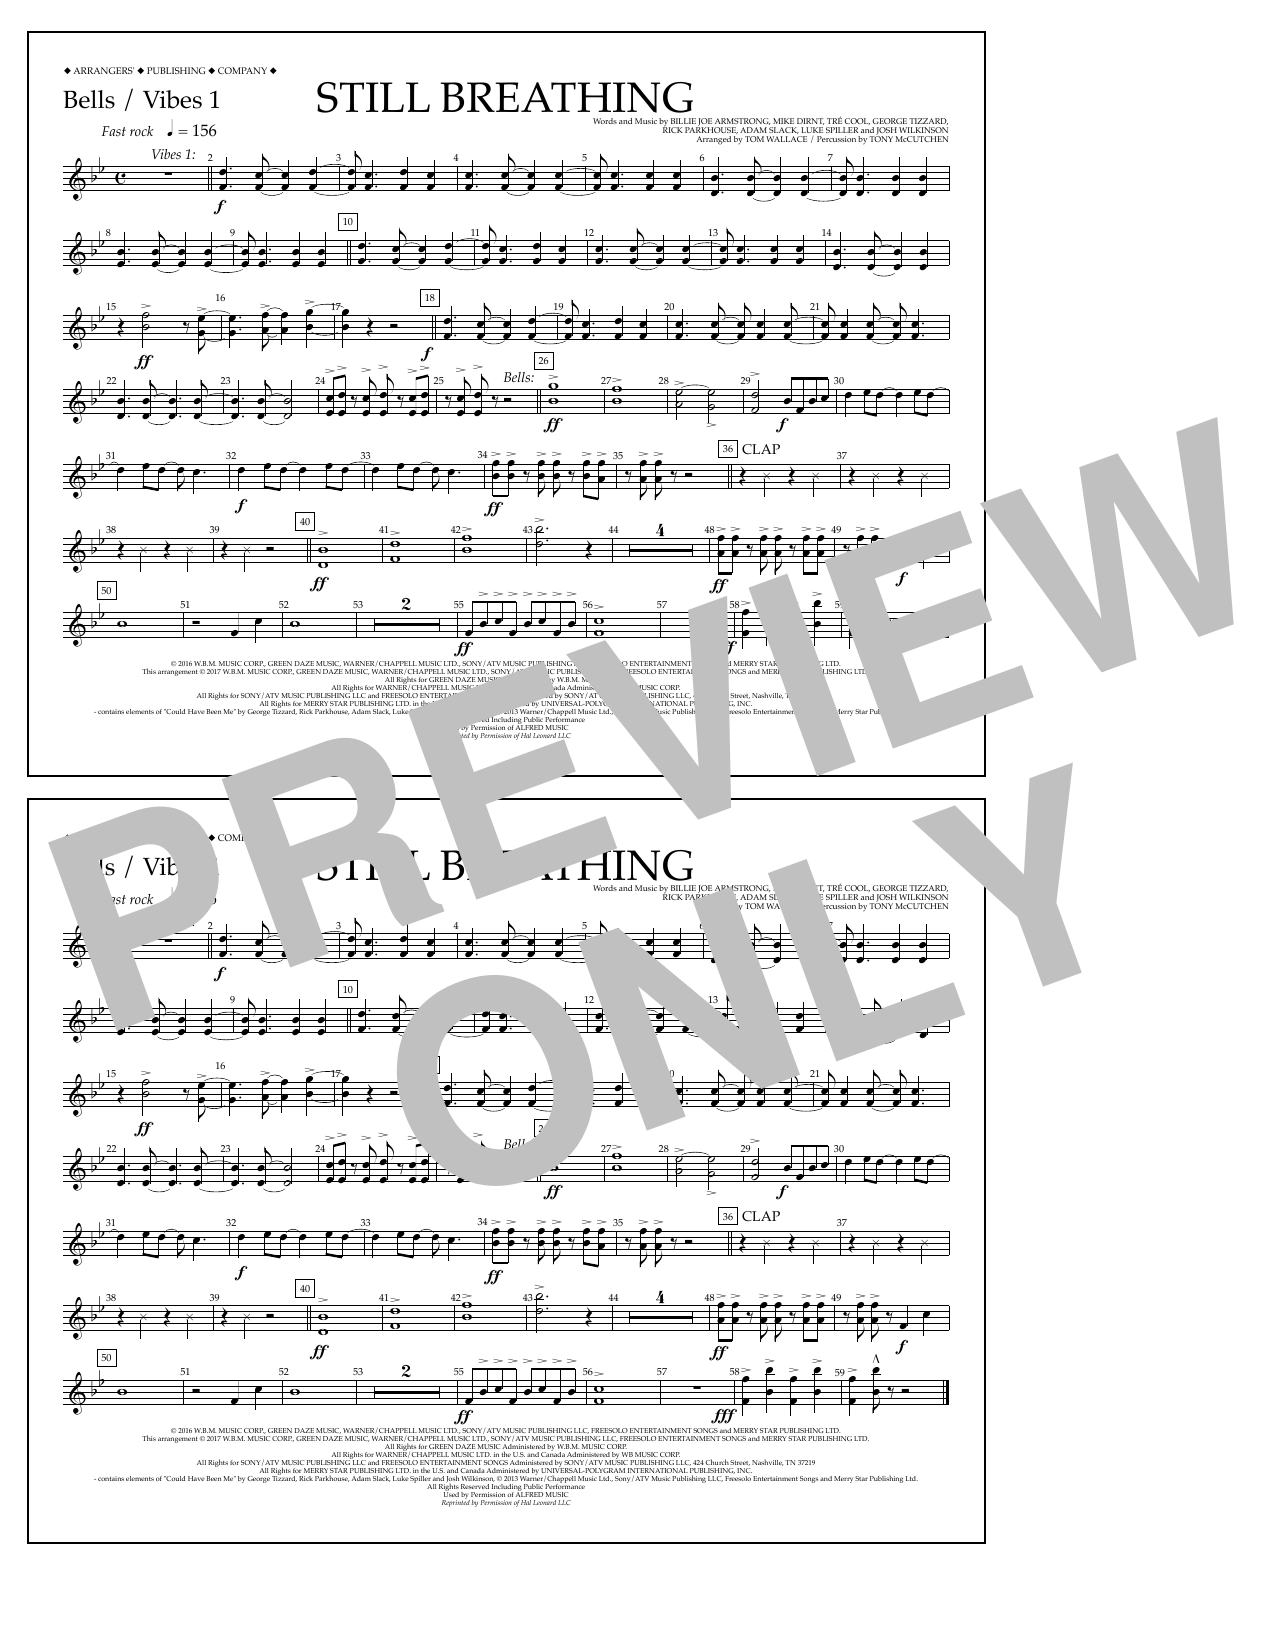 Download Tom Wallace Still Breathing - Bells/Vibes 1 Sheet Music